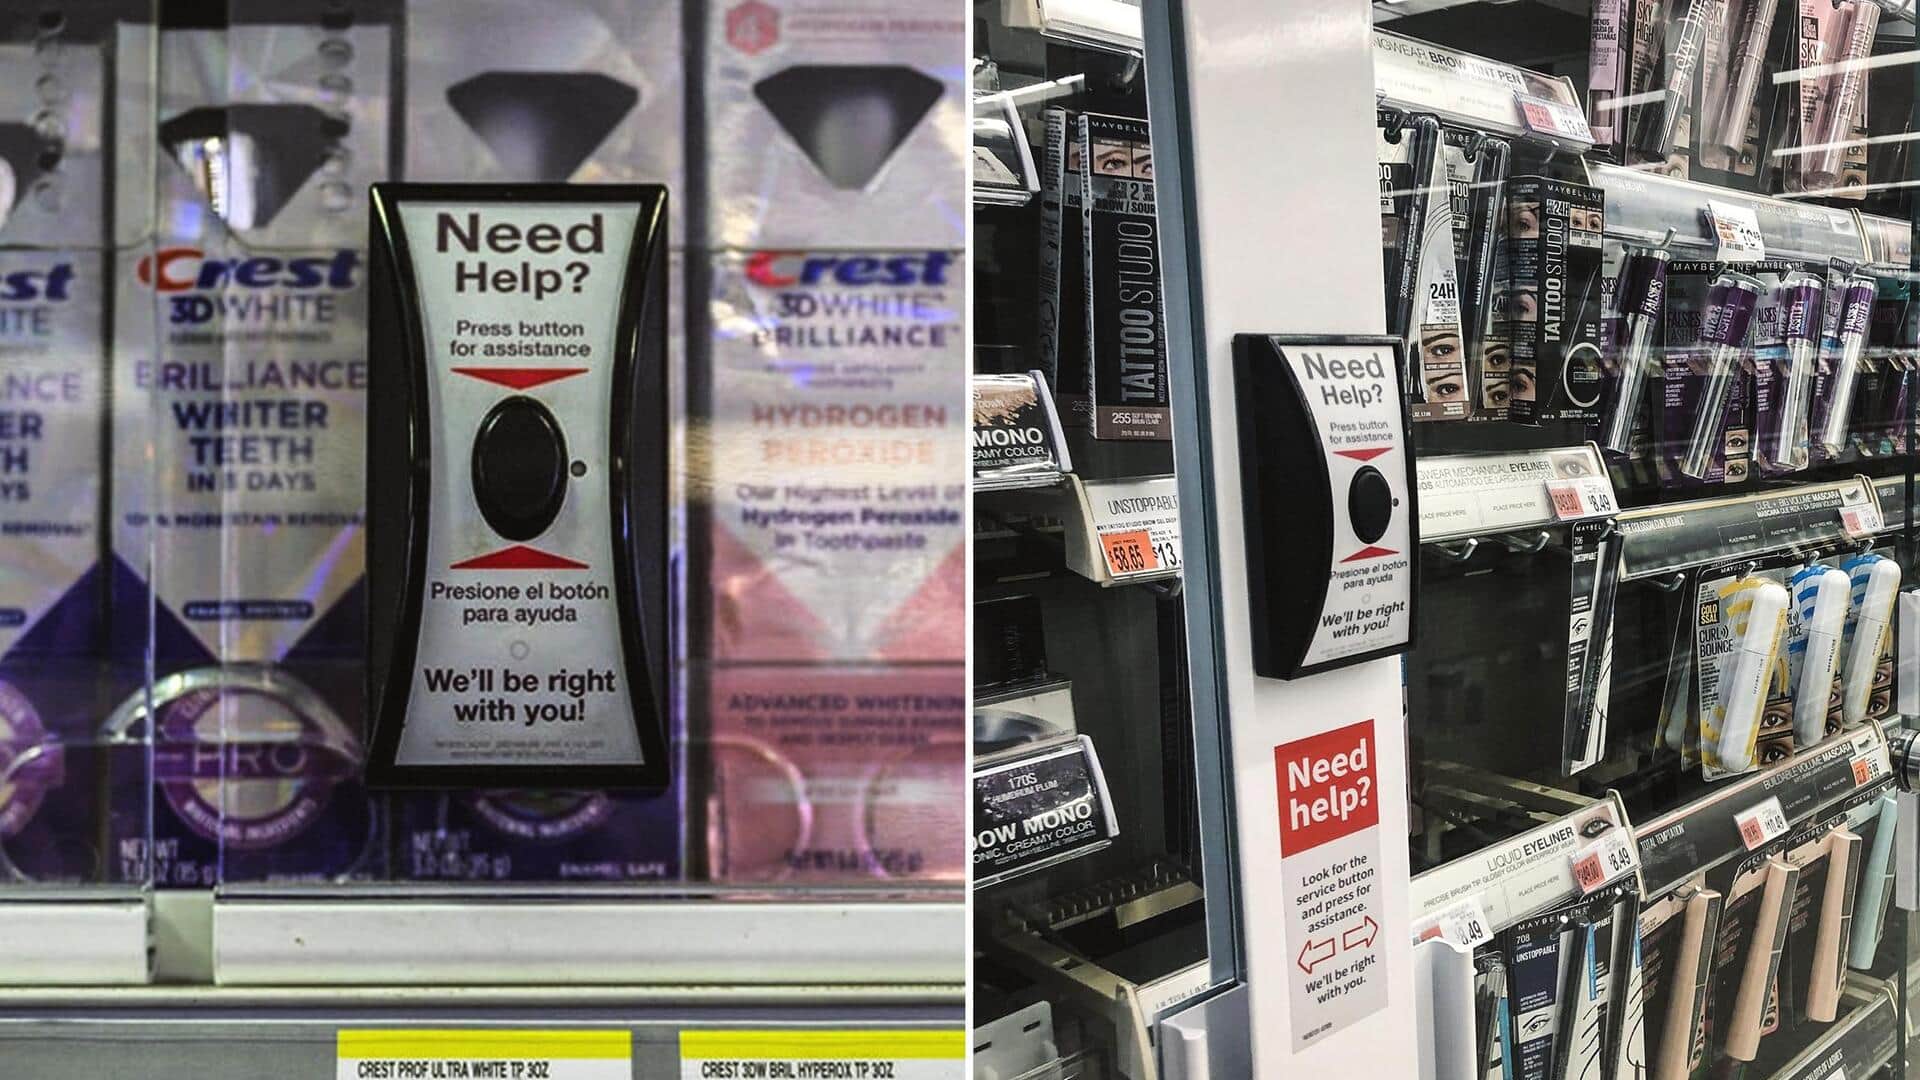 US stores are keeping toothpaste, deodorant in locks: Here's why